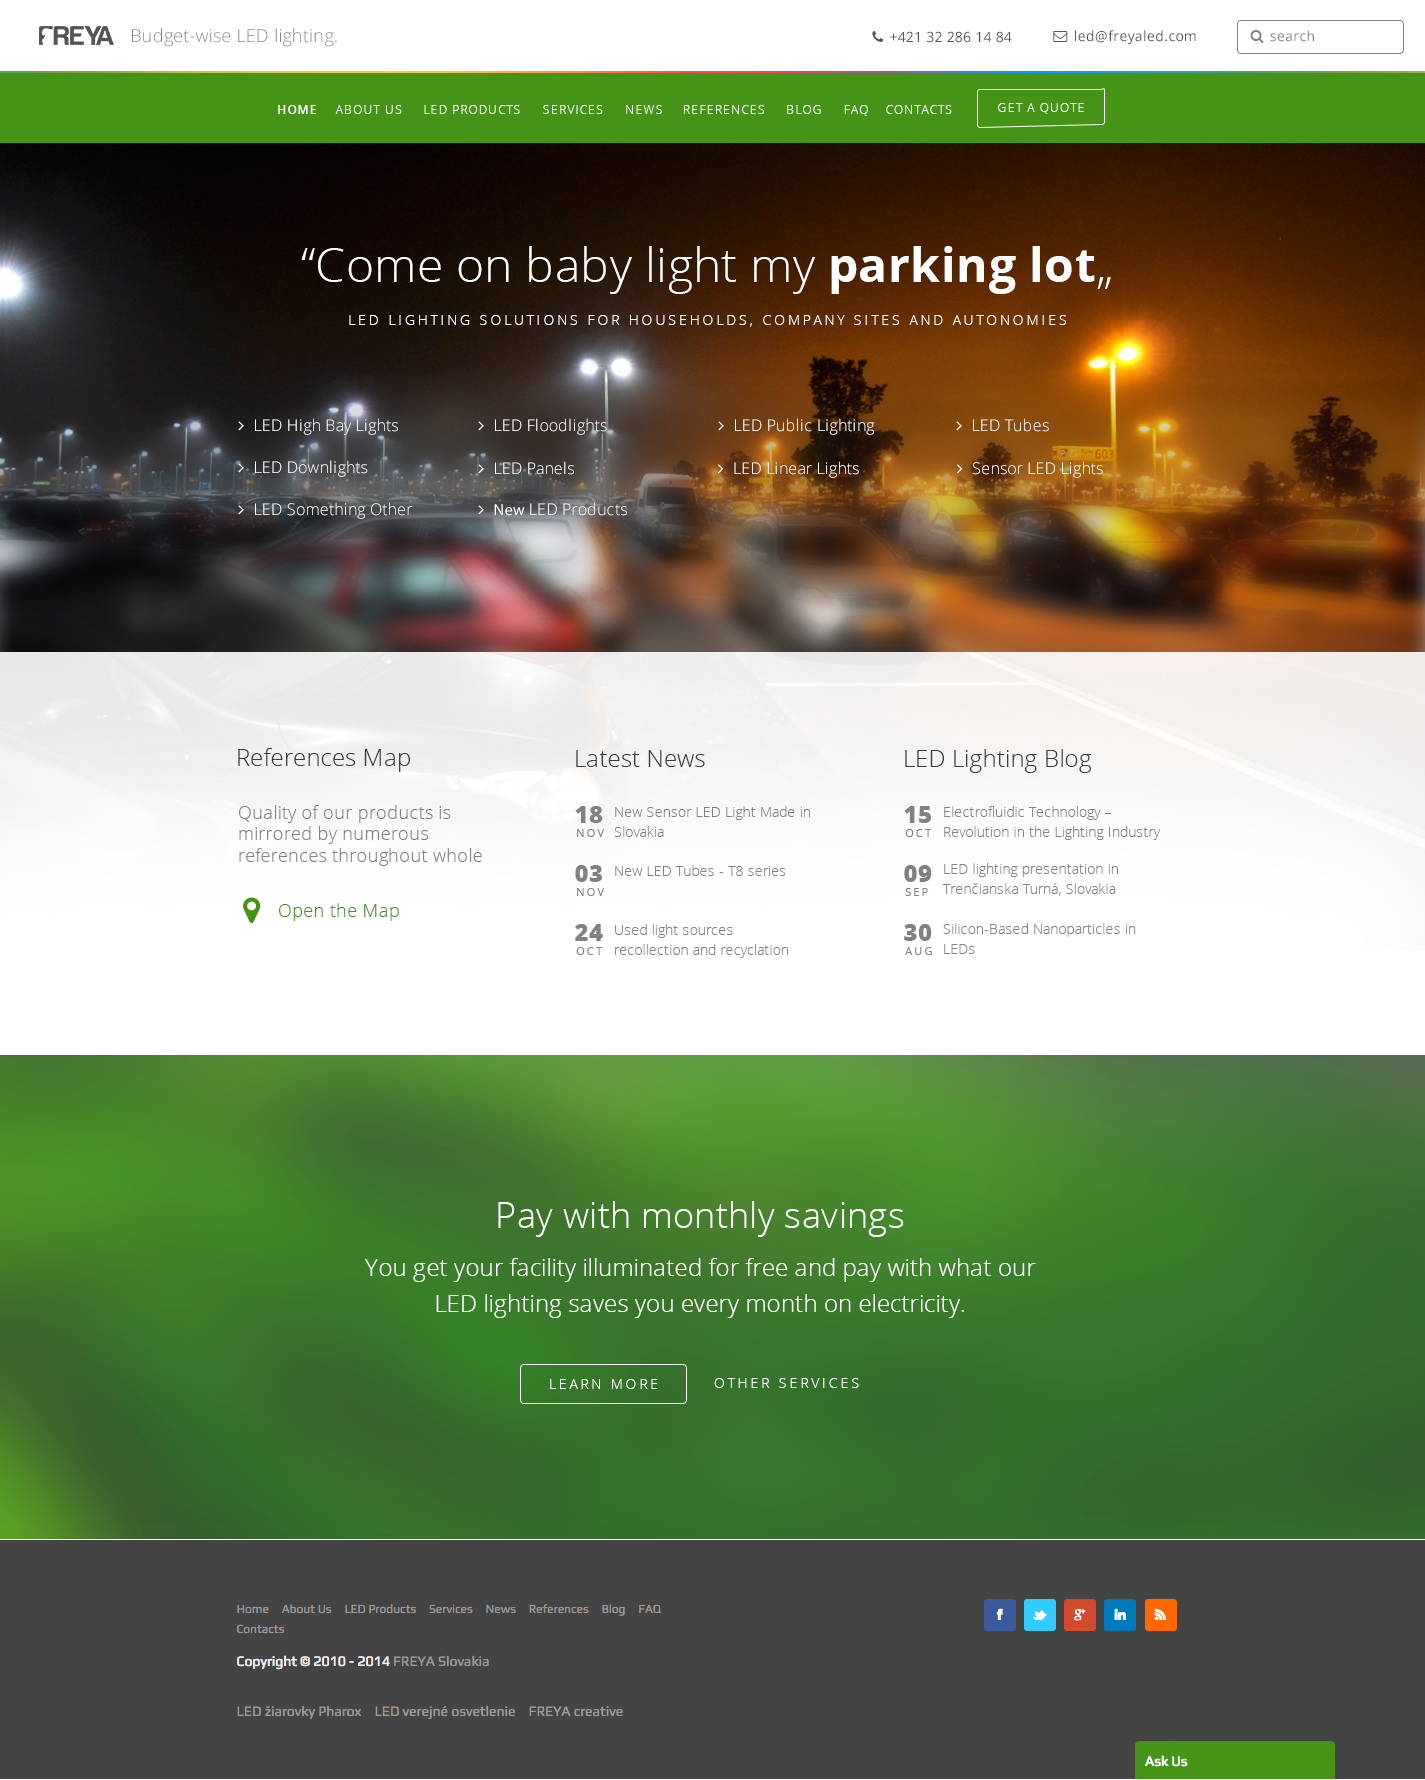 An example of freyaled.com design in 2015